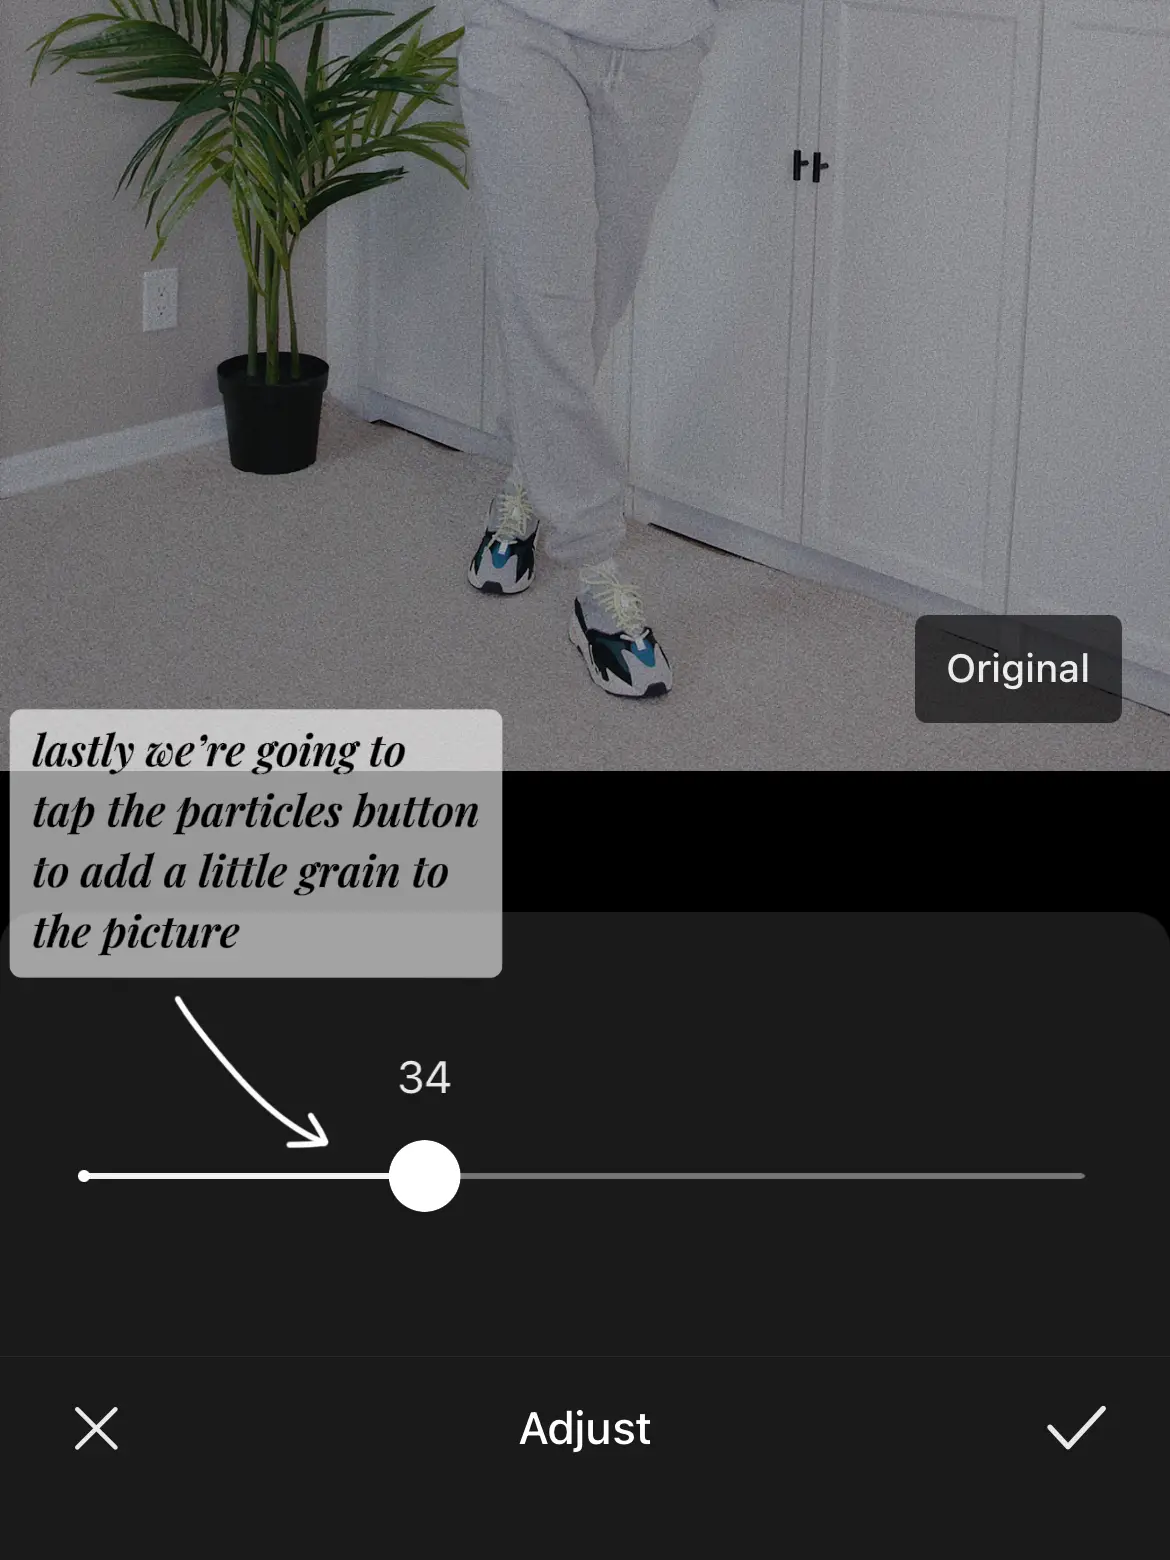  A person is standing in a room with a potted plant. They are wearing shoes and are about to tap the particles button to add a little grain